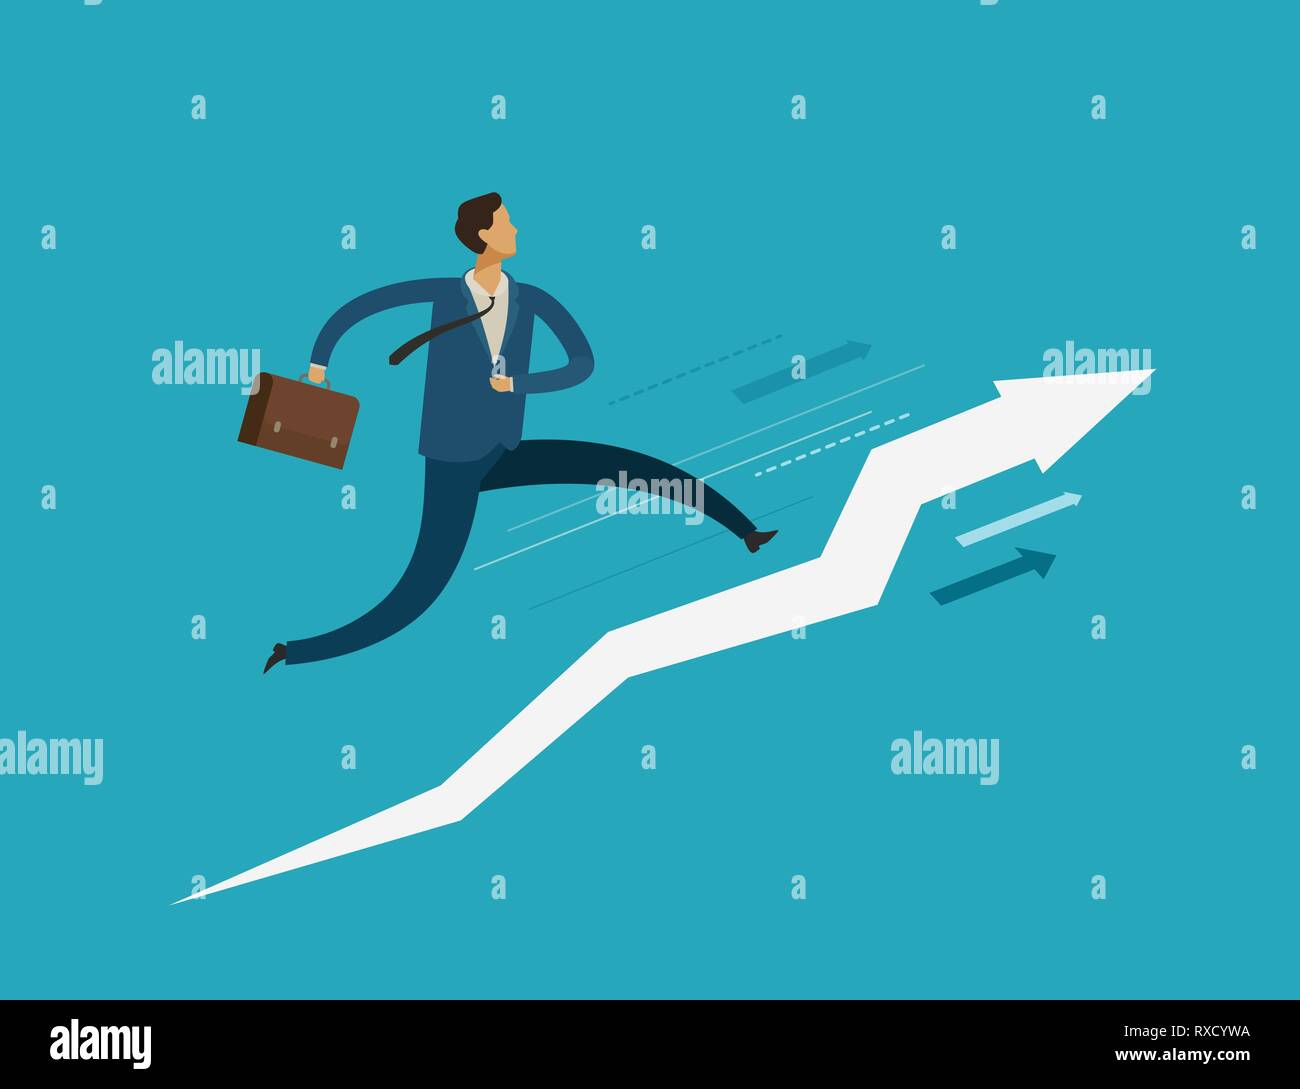 Businessman running up stairway. Success, career ladder concept. Business vector illustration Stock Vector